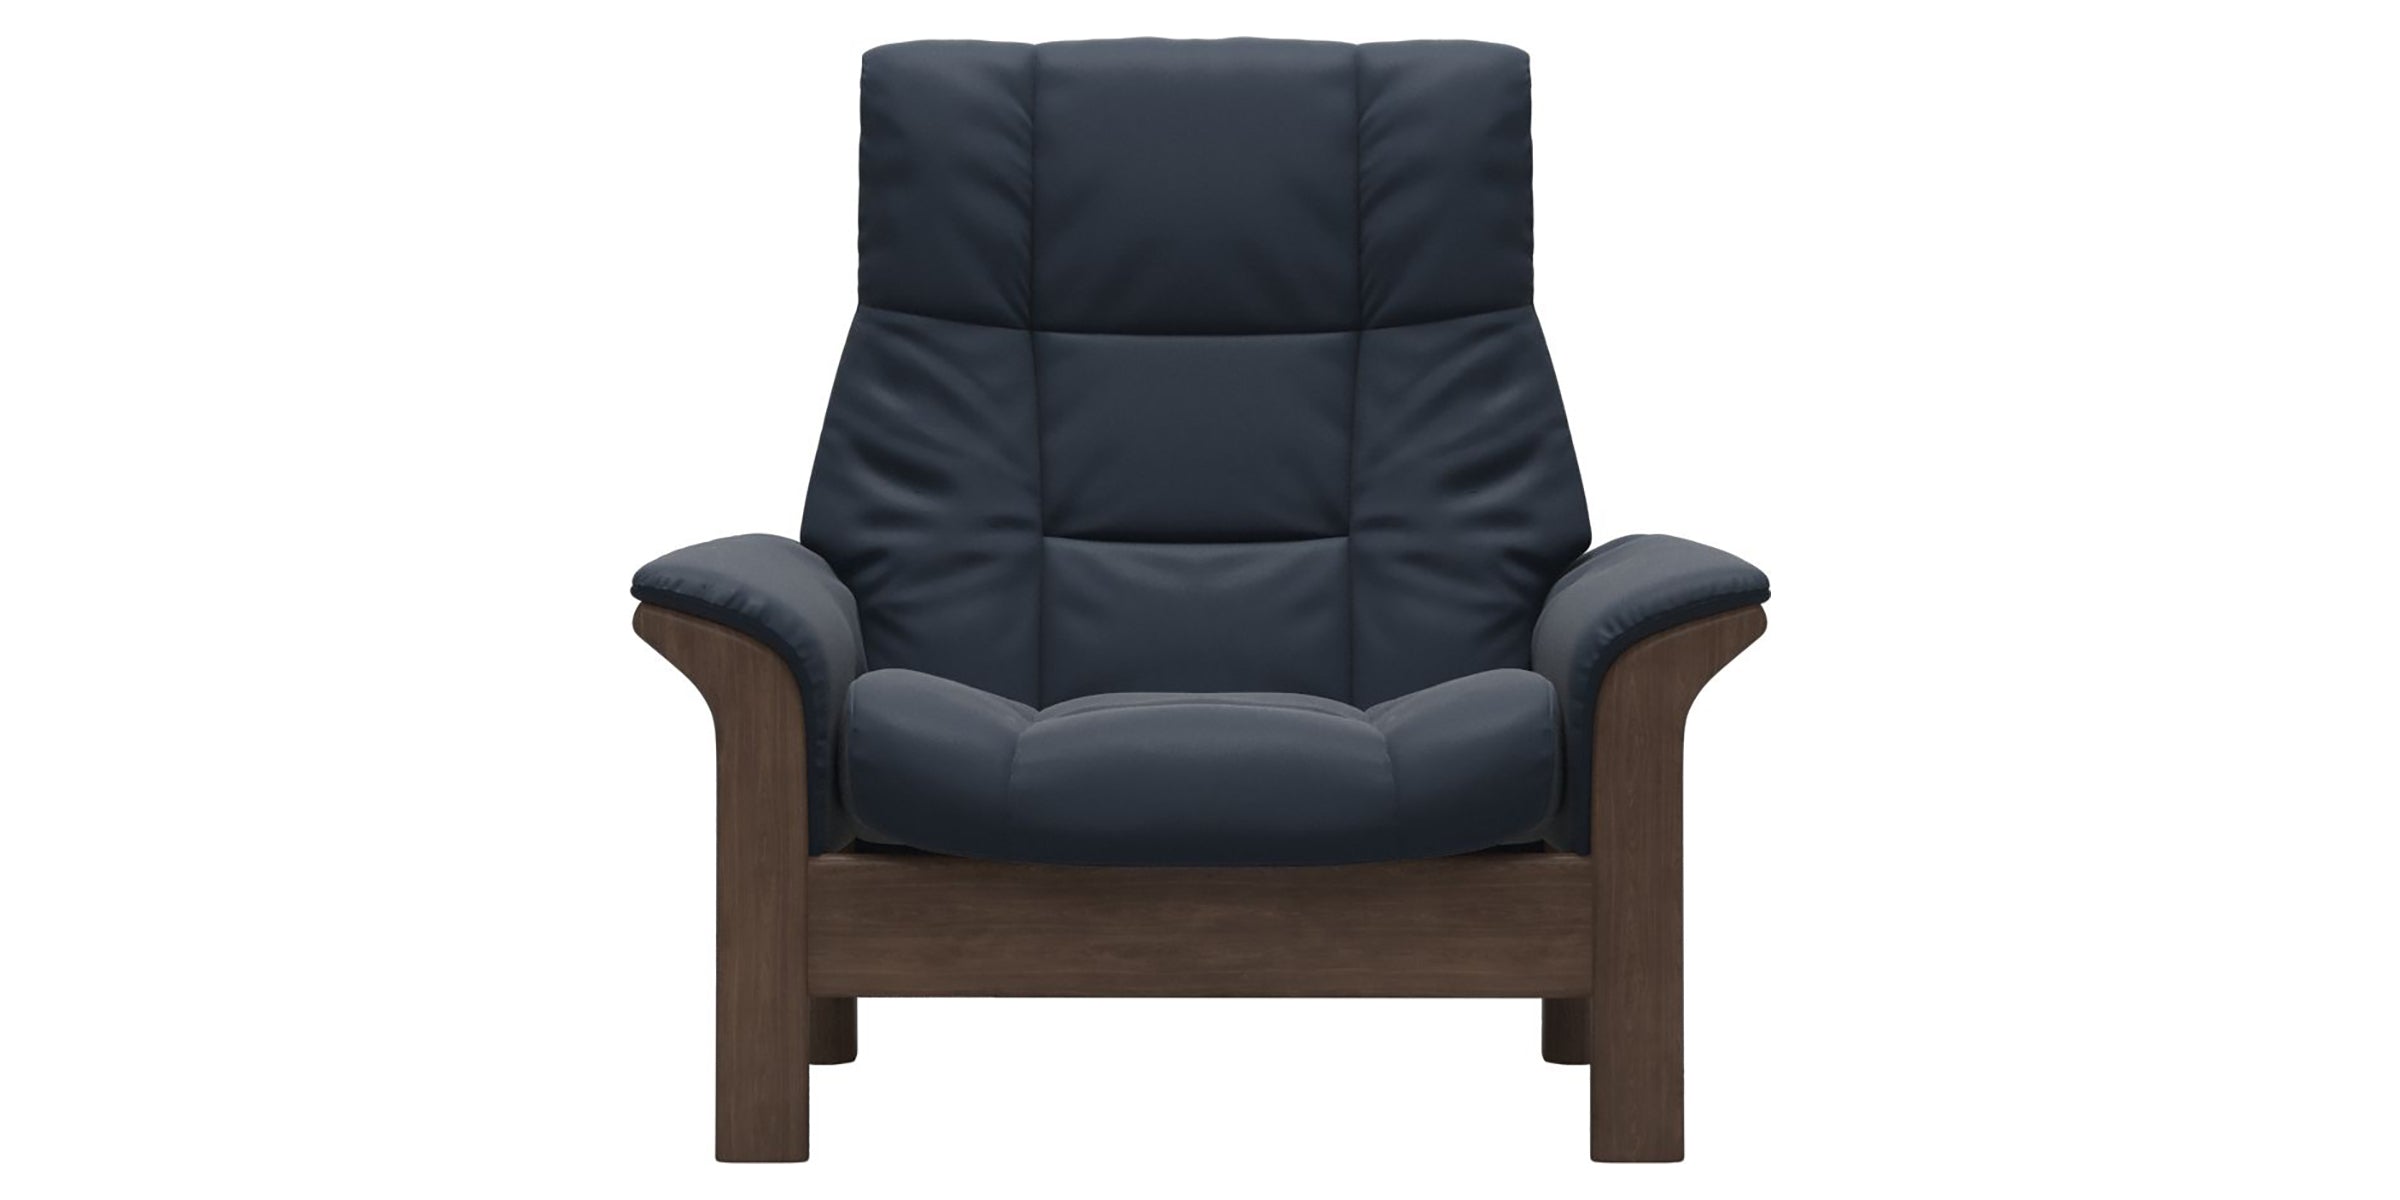 Paloma Leather Oxford Blue and Walnut Base | Stressless Buckingham High Back Chair | Valley Ridge Furniture